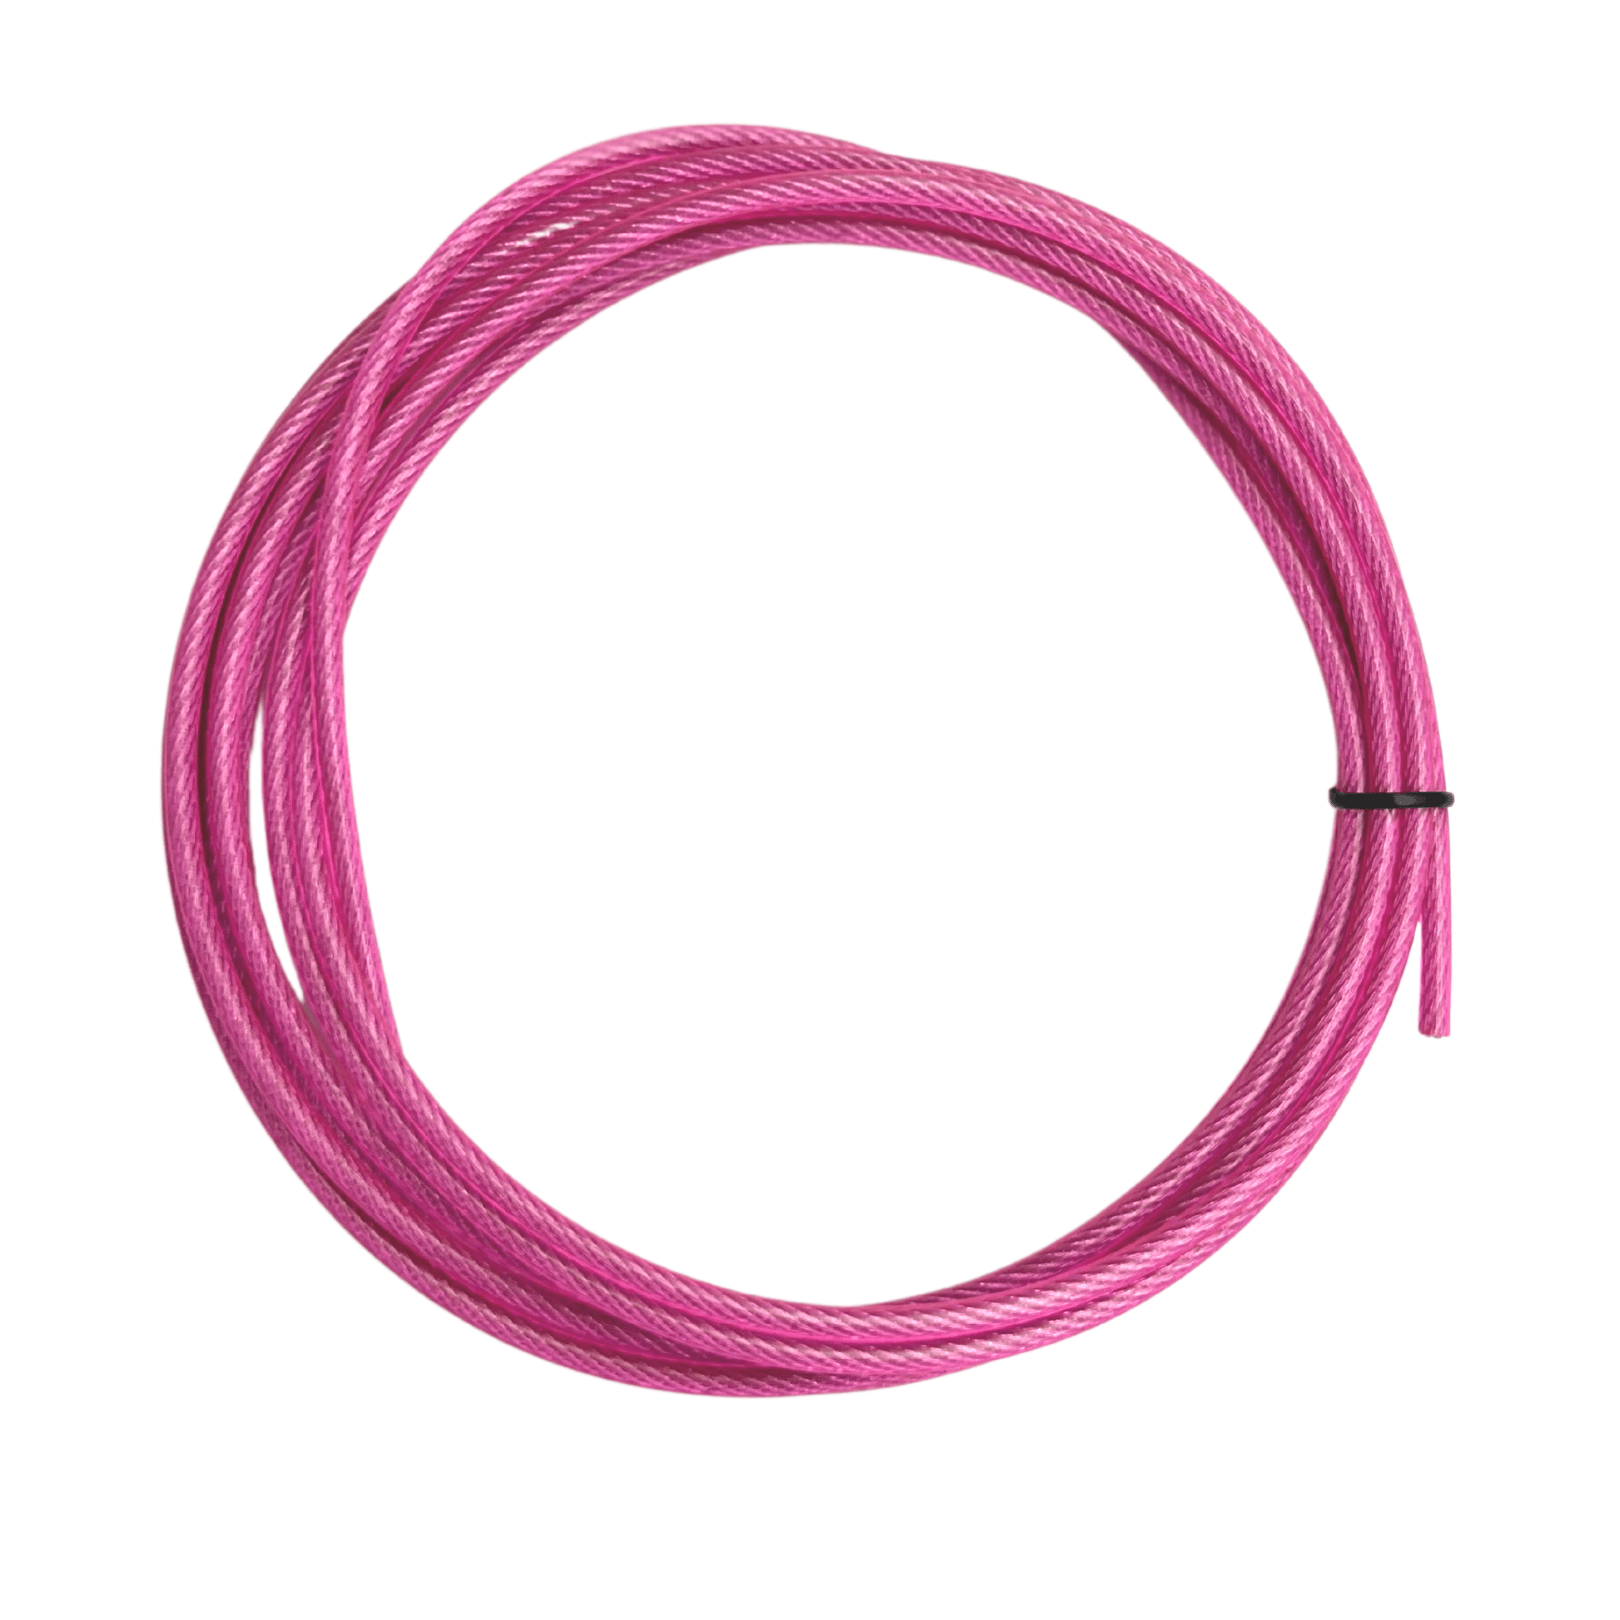 GND SR Skipping Rope Replacement Rope // Pink 3.4mm - SR Skipping Rope- GND Fitness